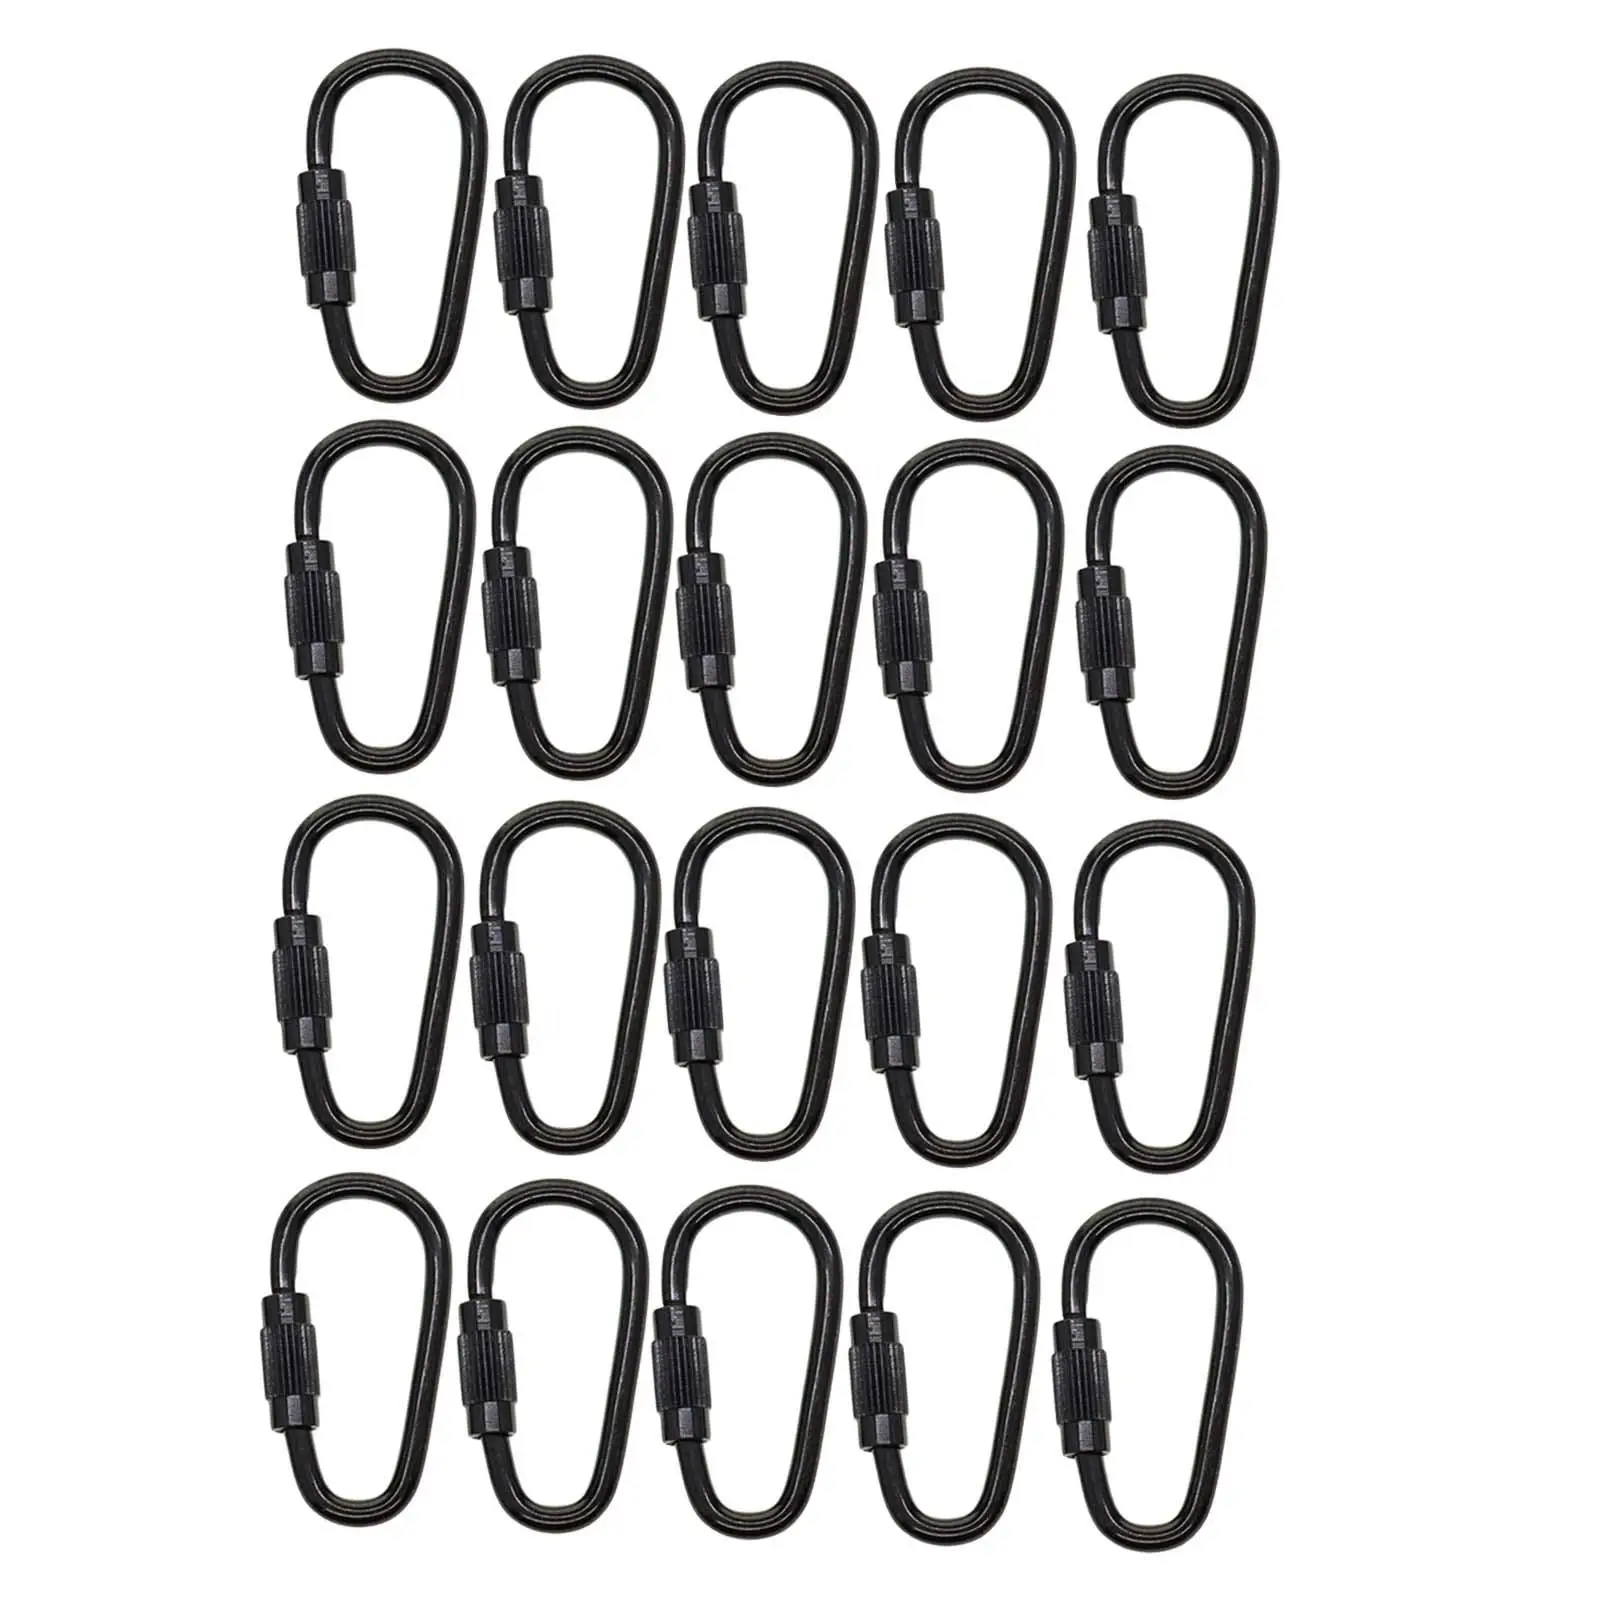 20x Small Locking Carabiner Clip 1 inch Heavy Duty Screw Lock Carabiner for Traveling Backpacking Hiking Fishing Accessories